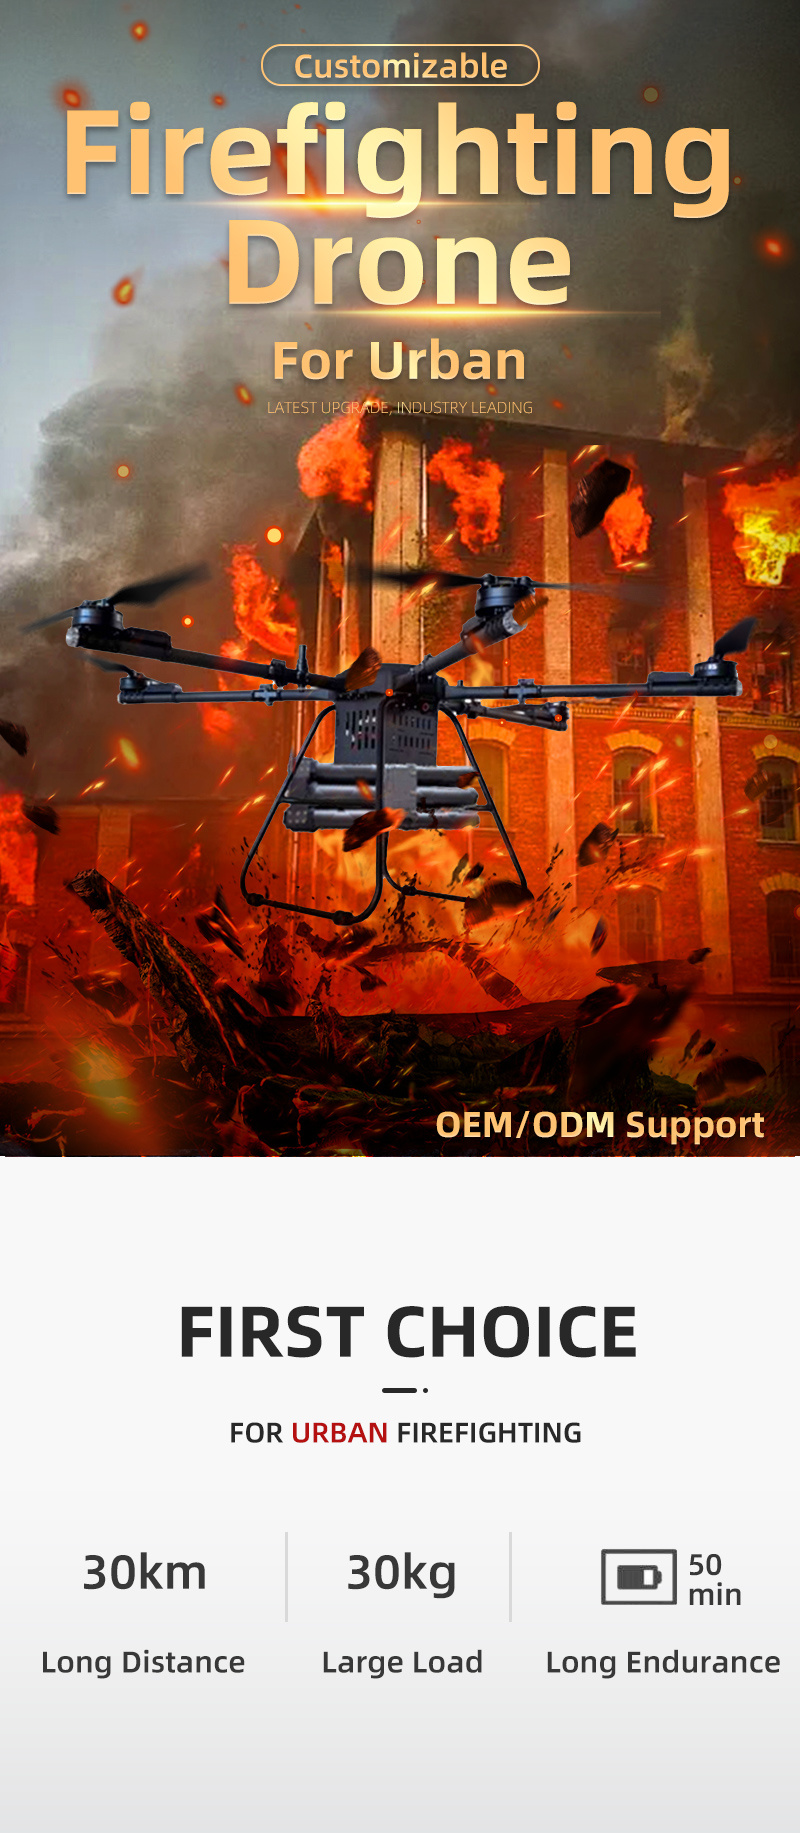 Fire Extinguisher Launch Aerial Forest Wildland Firefighting Heavy Lifting 30kg Payload Industrial Drone